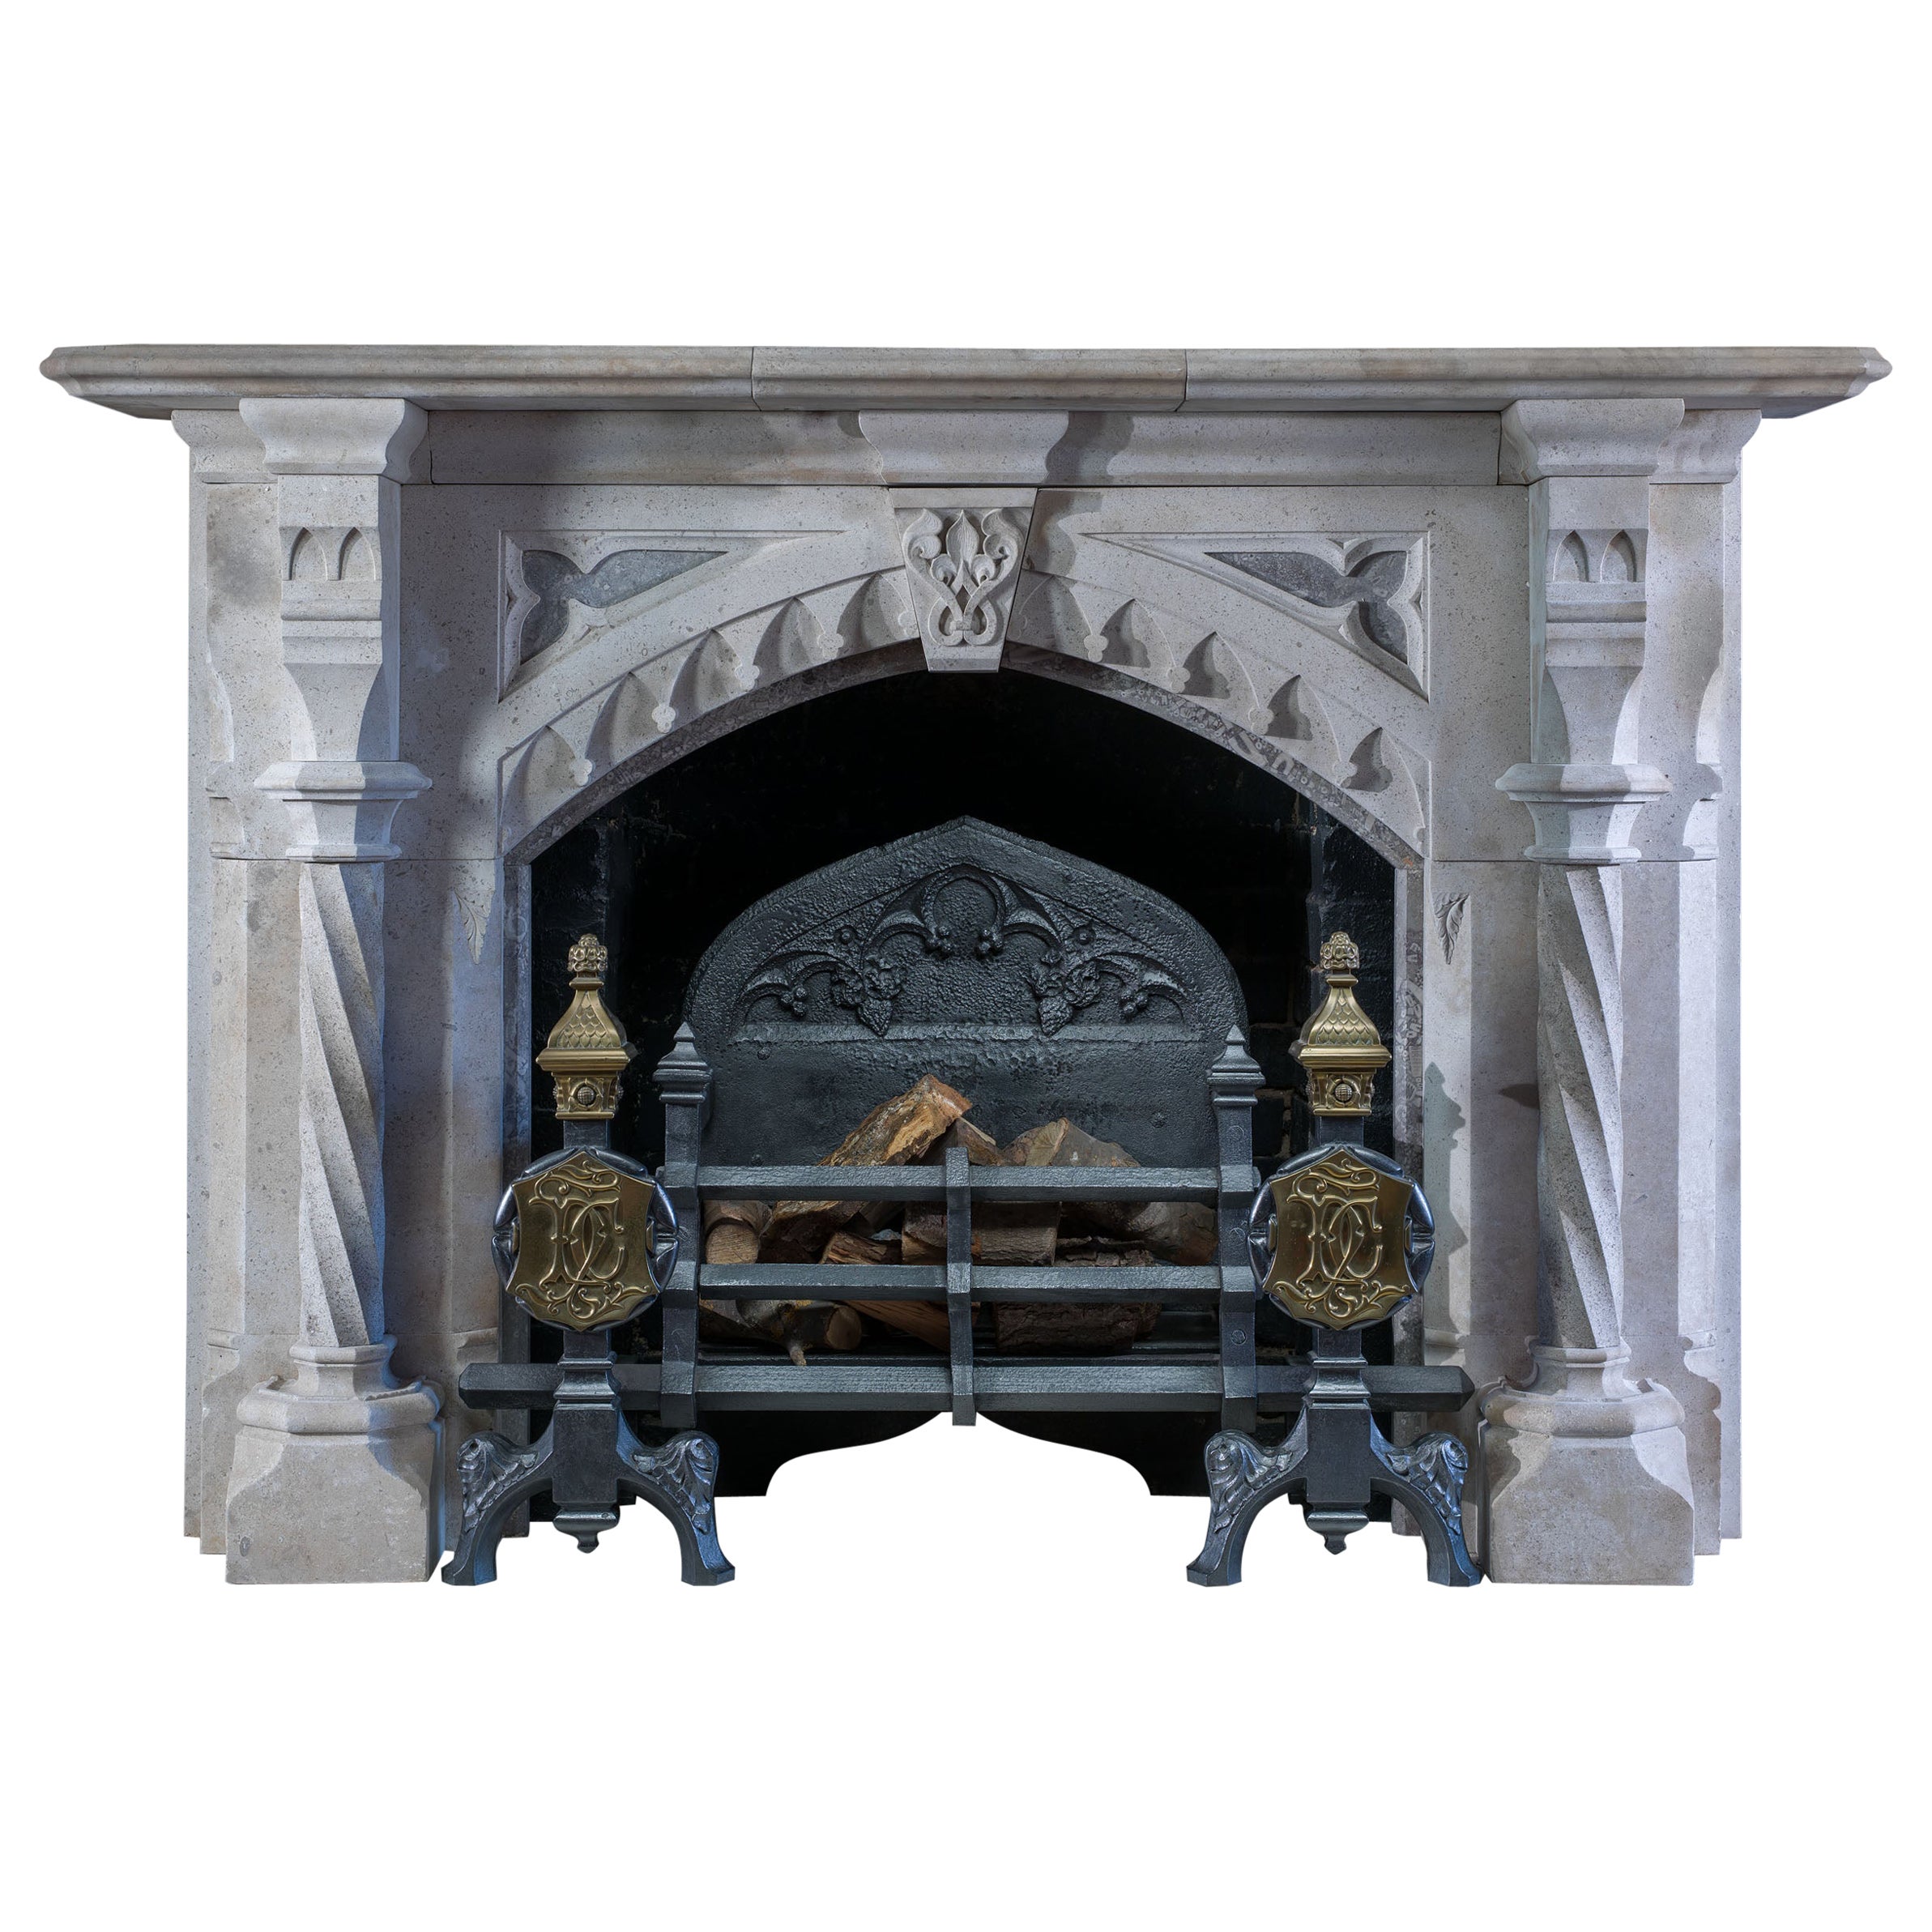 19th Century Stone Gothic Revival Fireplace Mantel